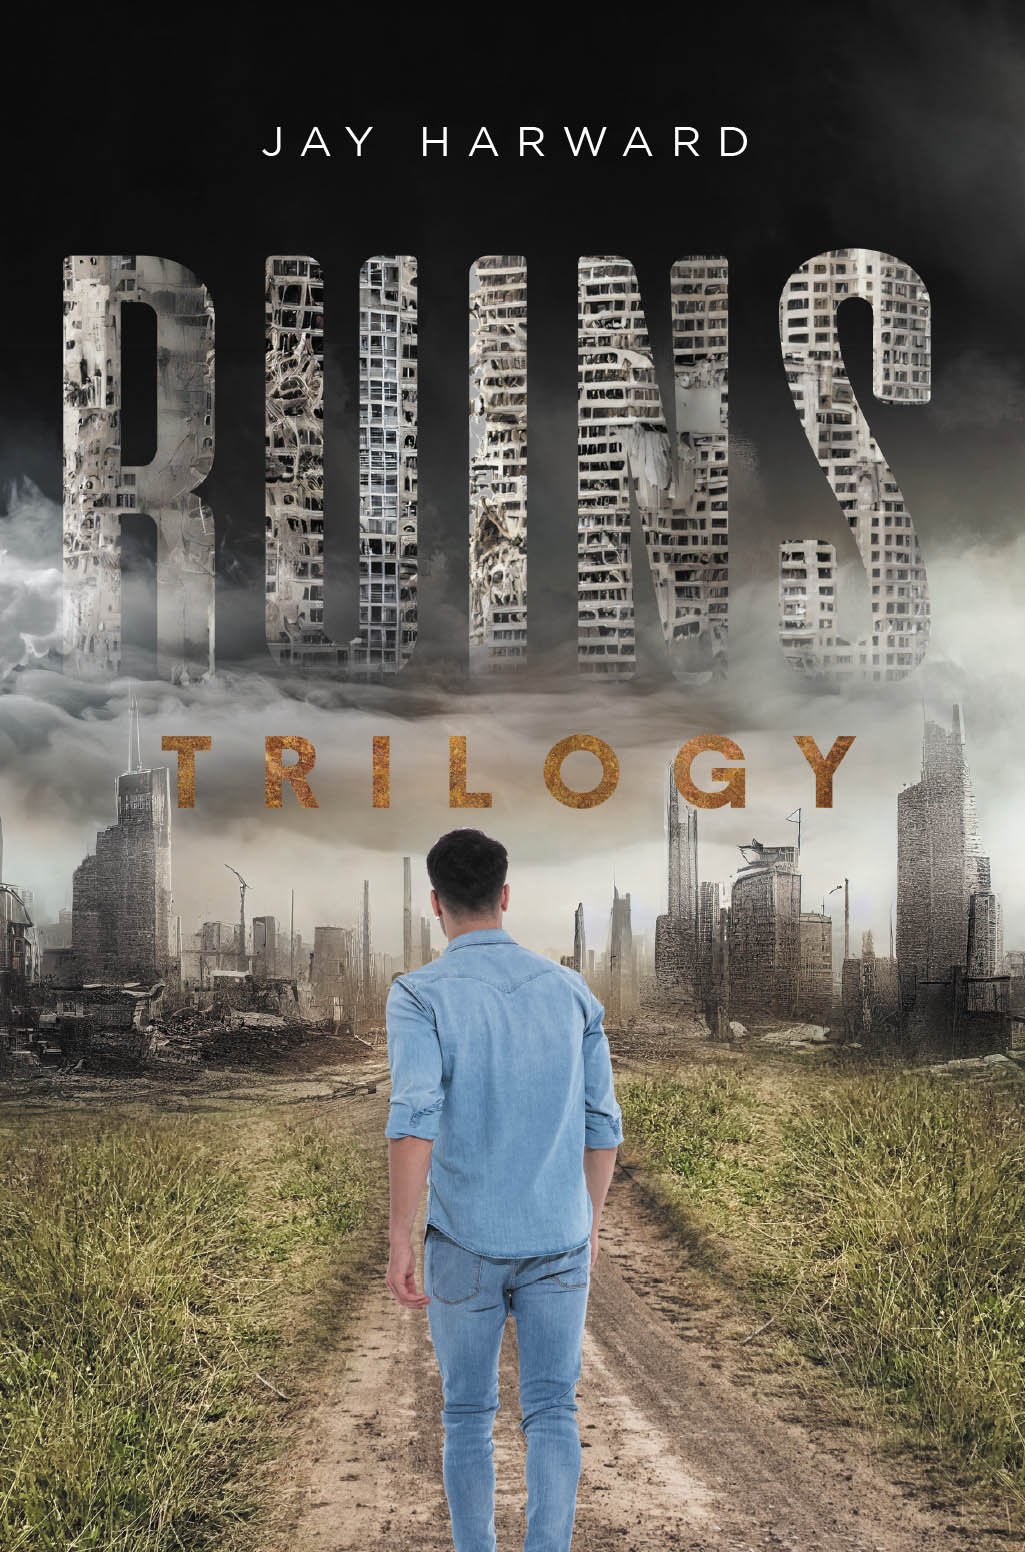 Author Jay Harward’s New Book, "Ruins: Trilogy," Presents Three Stories That Follow the Trials and Tribulations of Three Men During the Various Times in a City’s Downfall